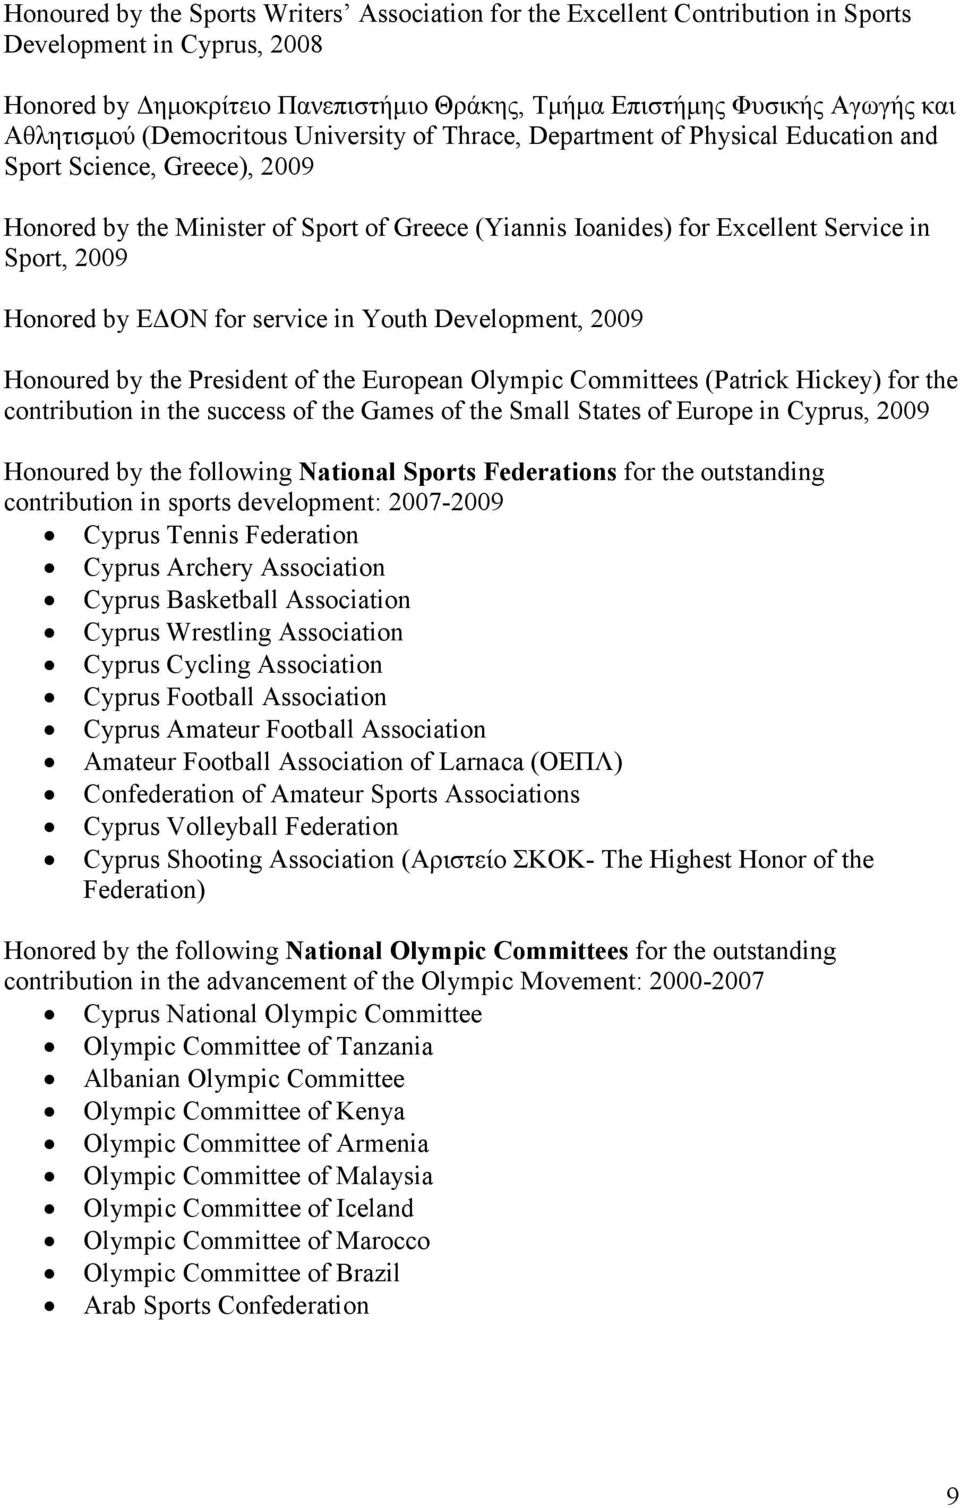 Sport, 2009 Honored by ΕΔΟΝ for service in Youth Development, 2009 Honoured by the President of the European Olympic Committees (Patrick Hickey) for the contribution in the success of the Games of